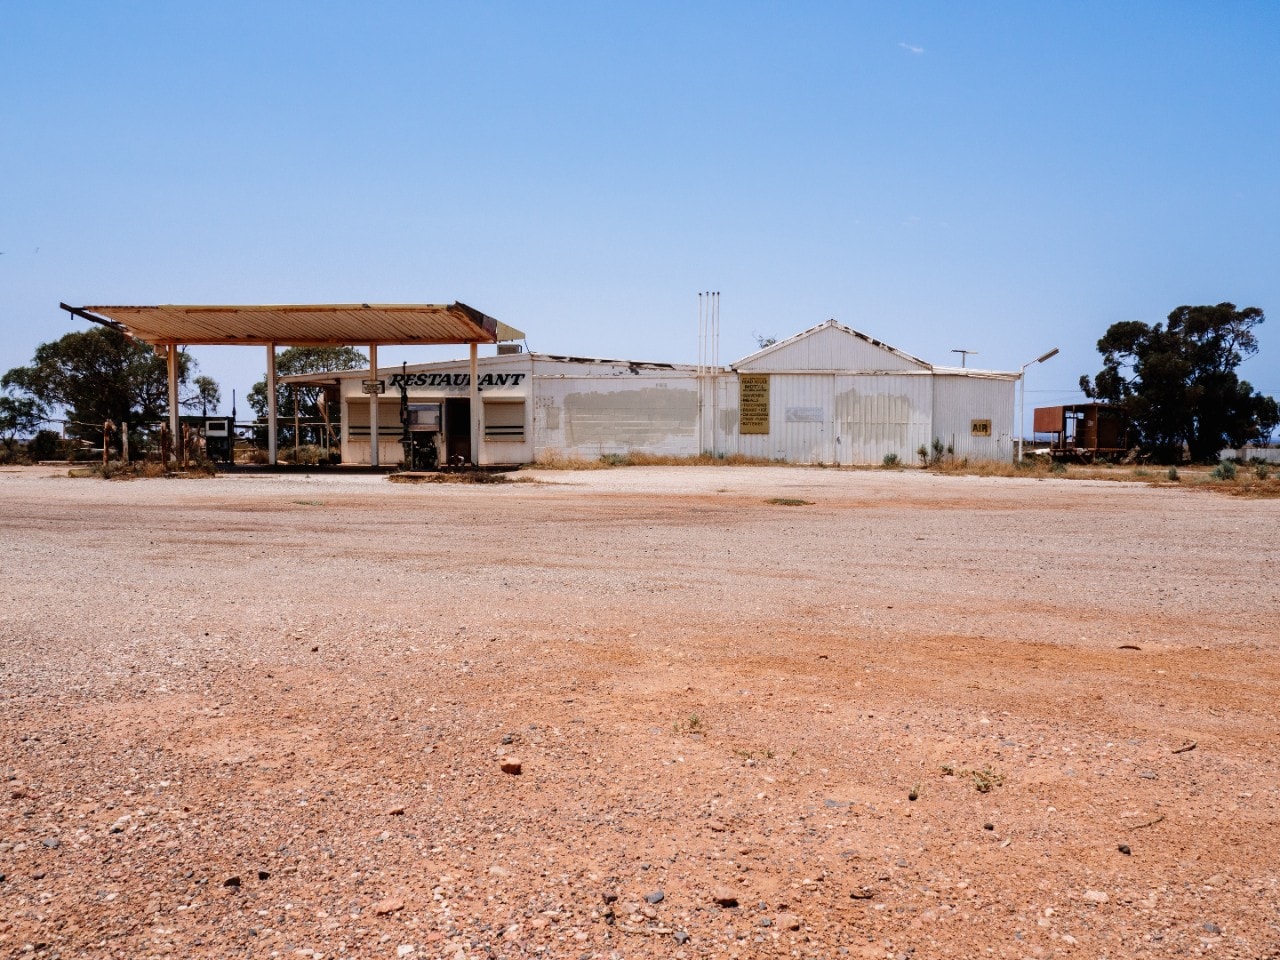 Abandoned outback roadhouse in Iron Knob - South Australia